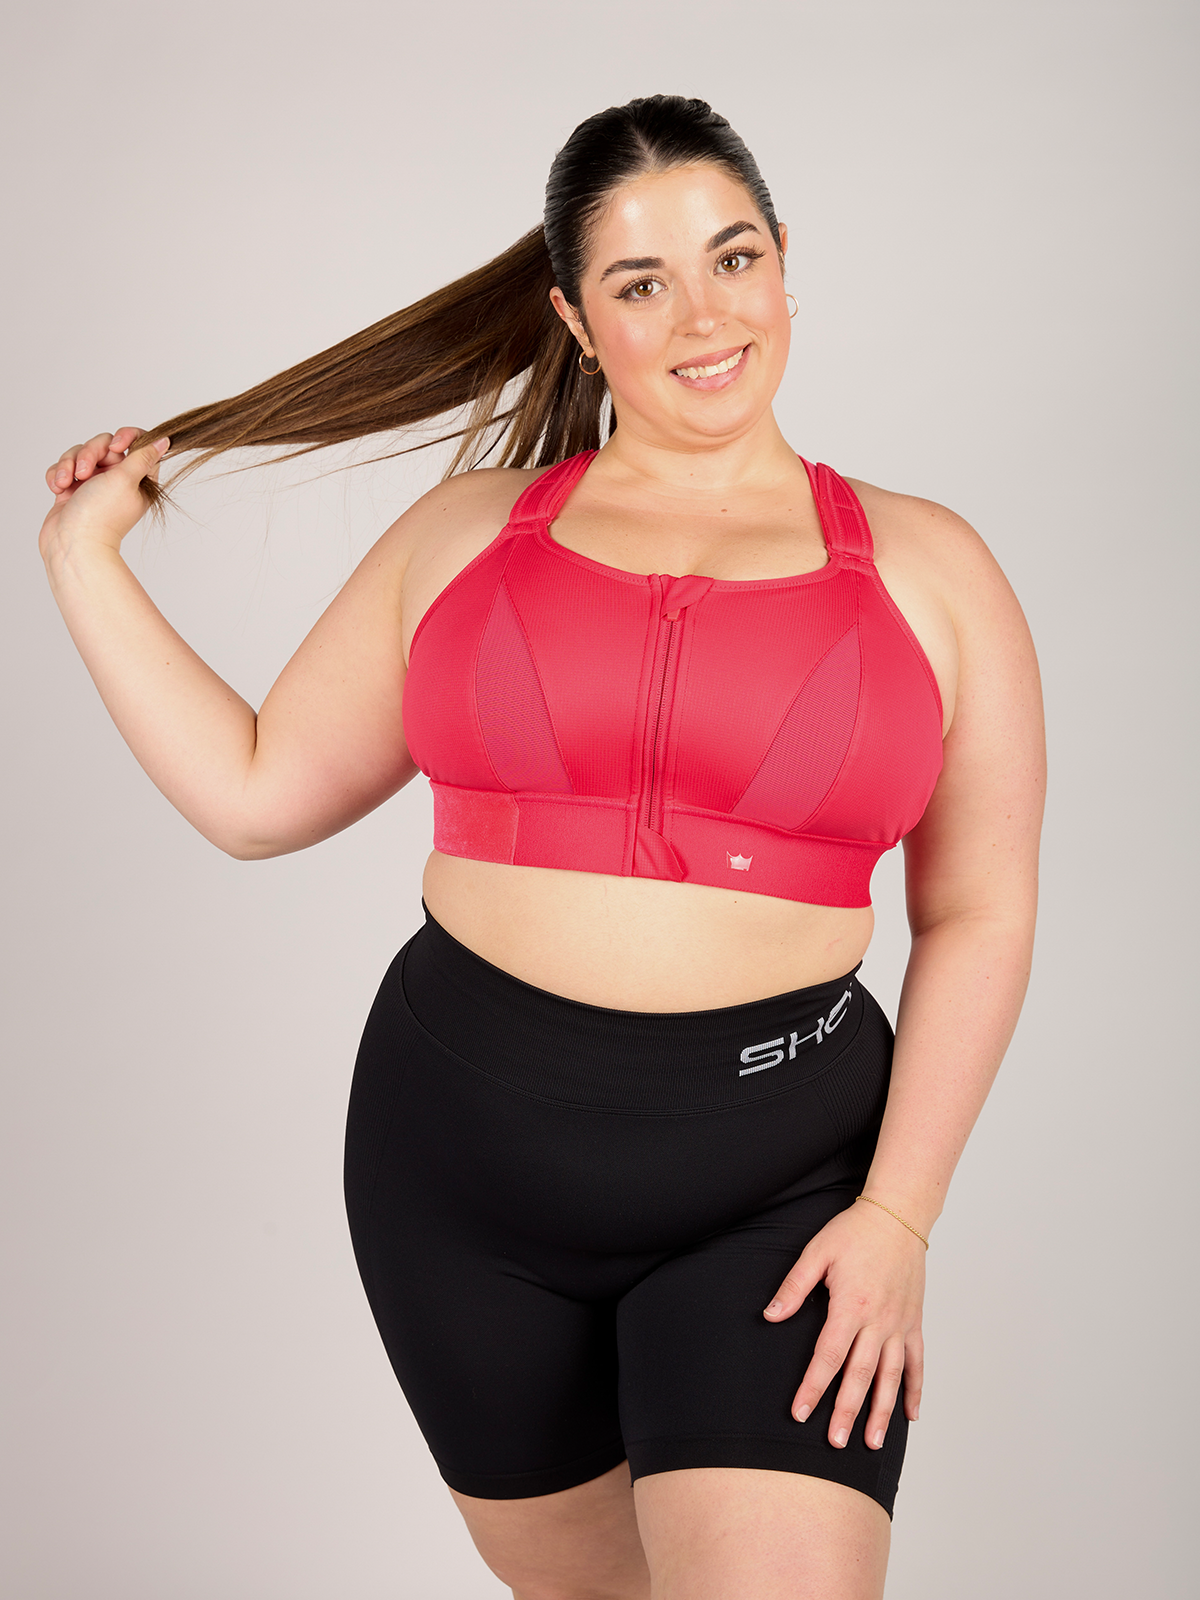 adviicd She Fit Sports Bras Compression Wirefree High Support Bra for Women  Small to Plus Size Everyday Wear, Exercise and Offers Back Support BK1